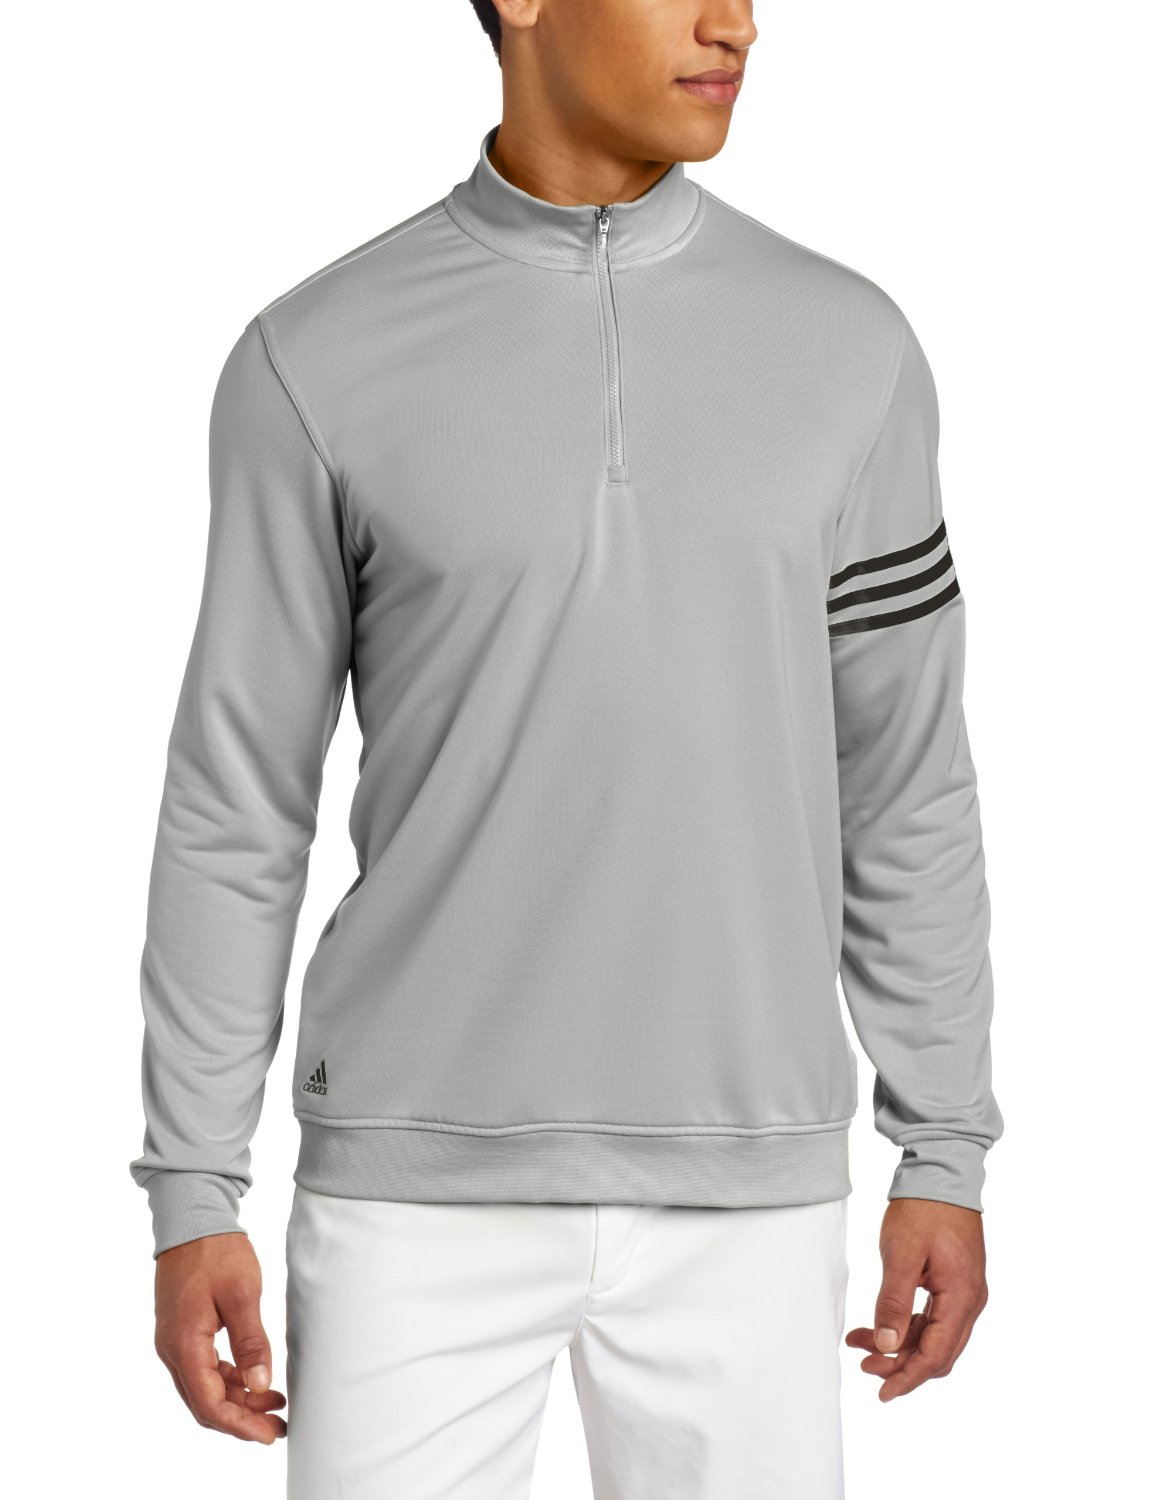 Adidas Climalite 3-Stripes Golf Pullovers